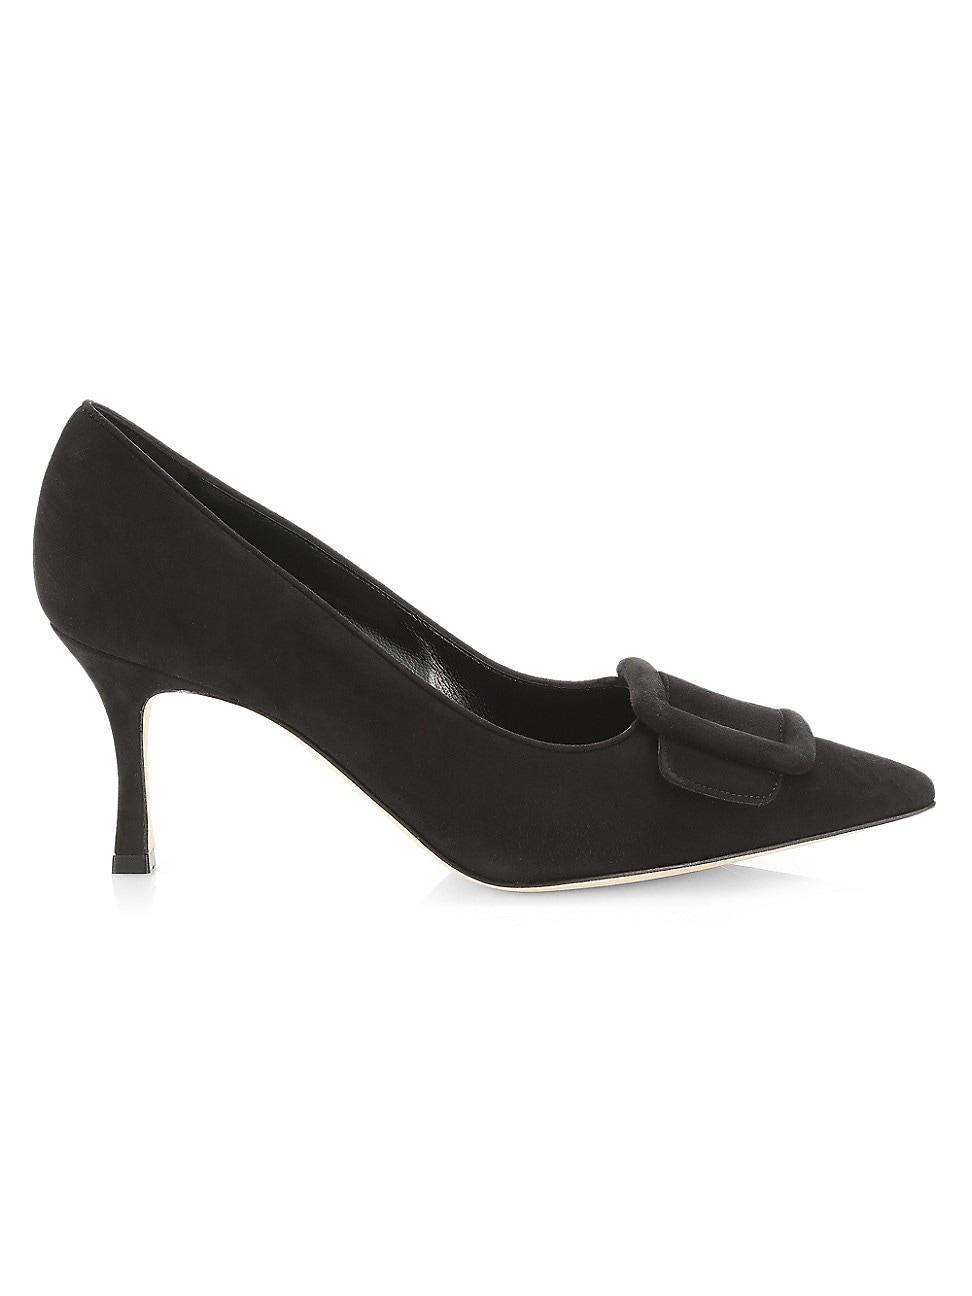 Maysale Suede Pointed-Toe Buckle Pumps Product Image